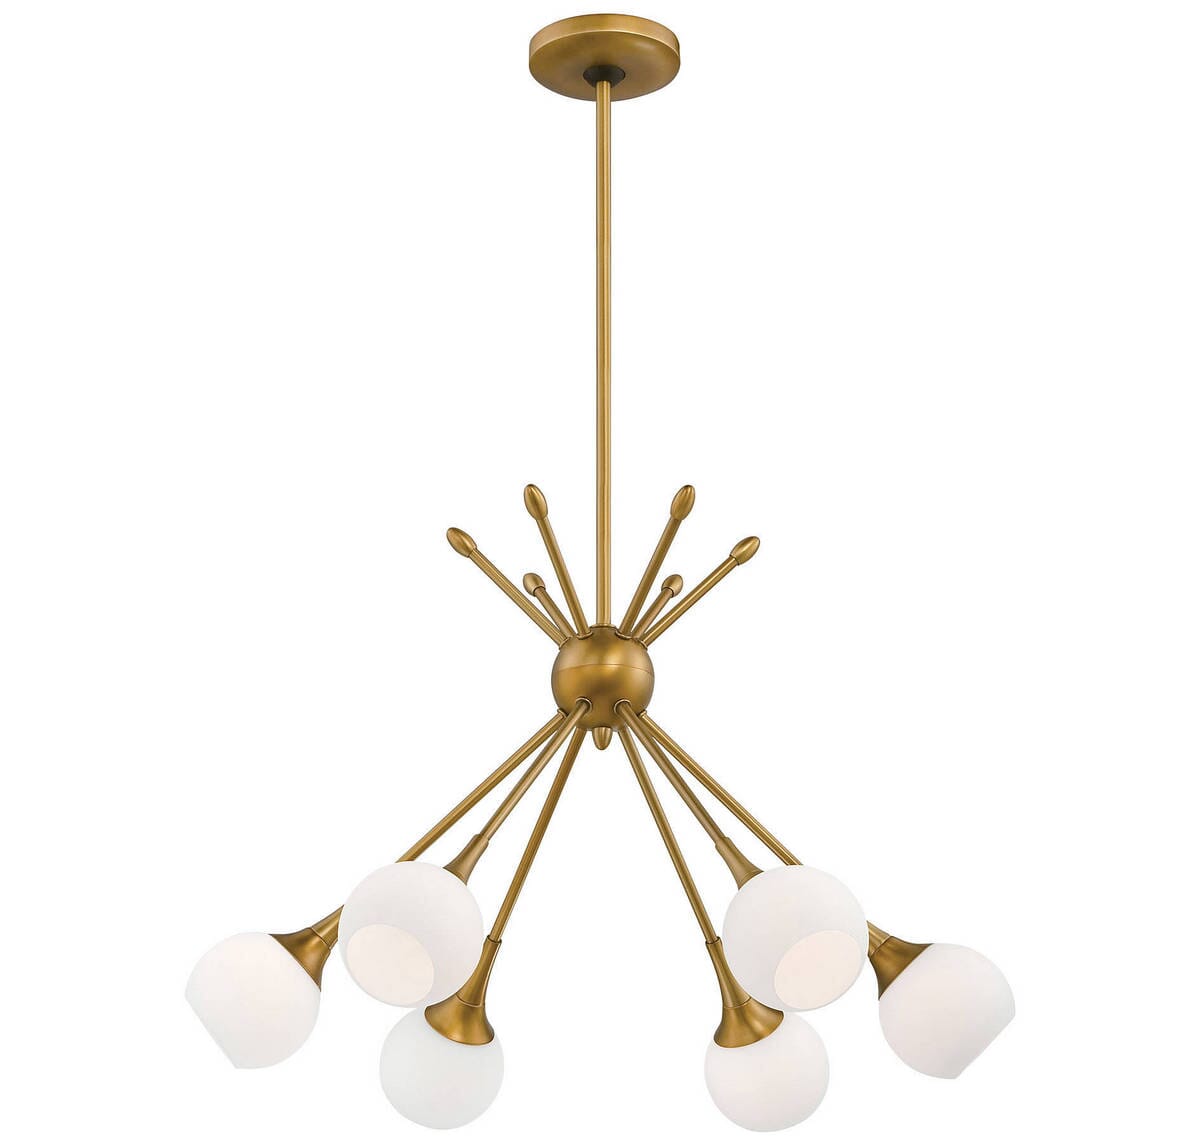 Not Just Crystal: A New Generation of Chandeliers Available at LightsOnline - LightsOnline Blog